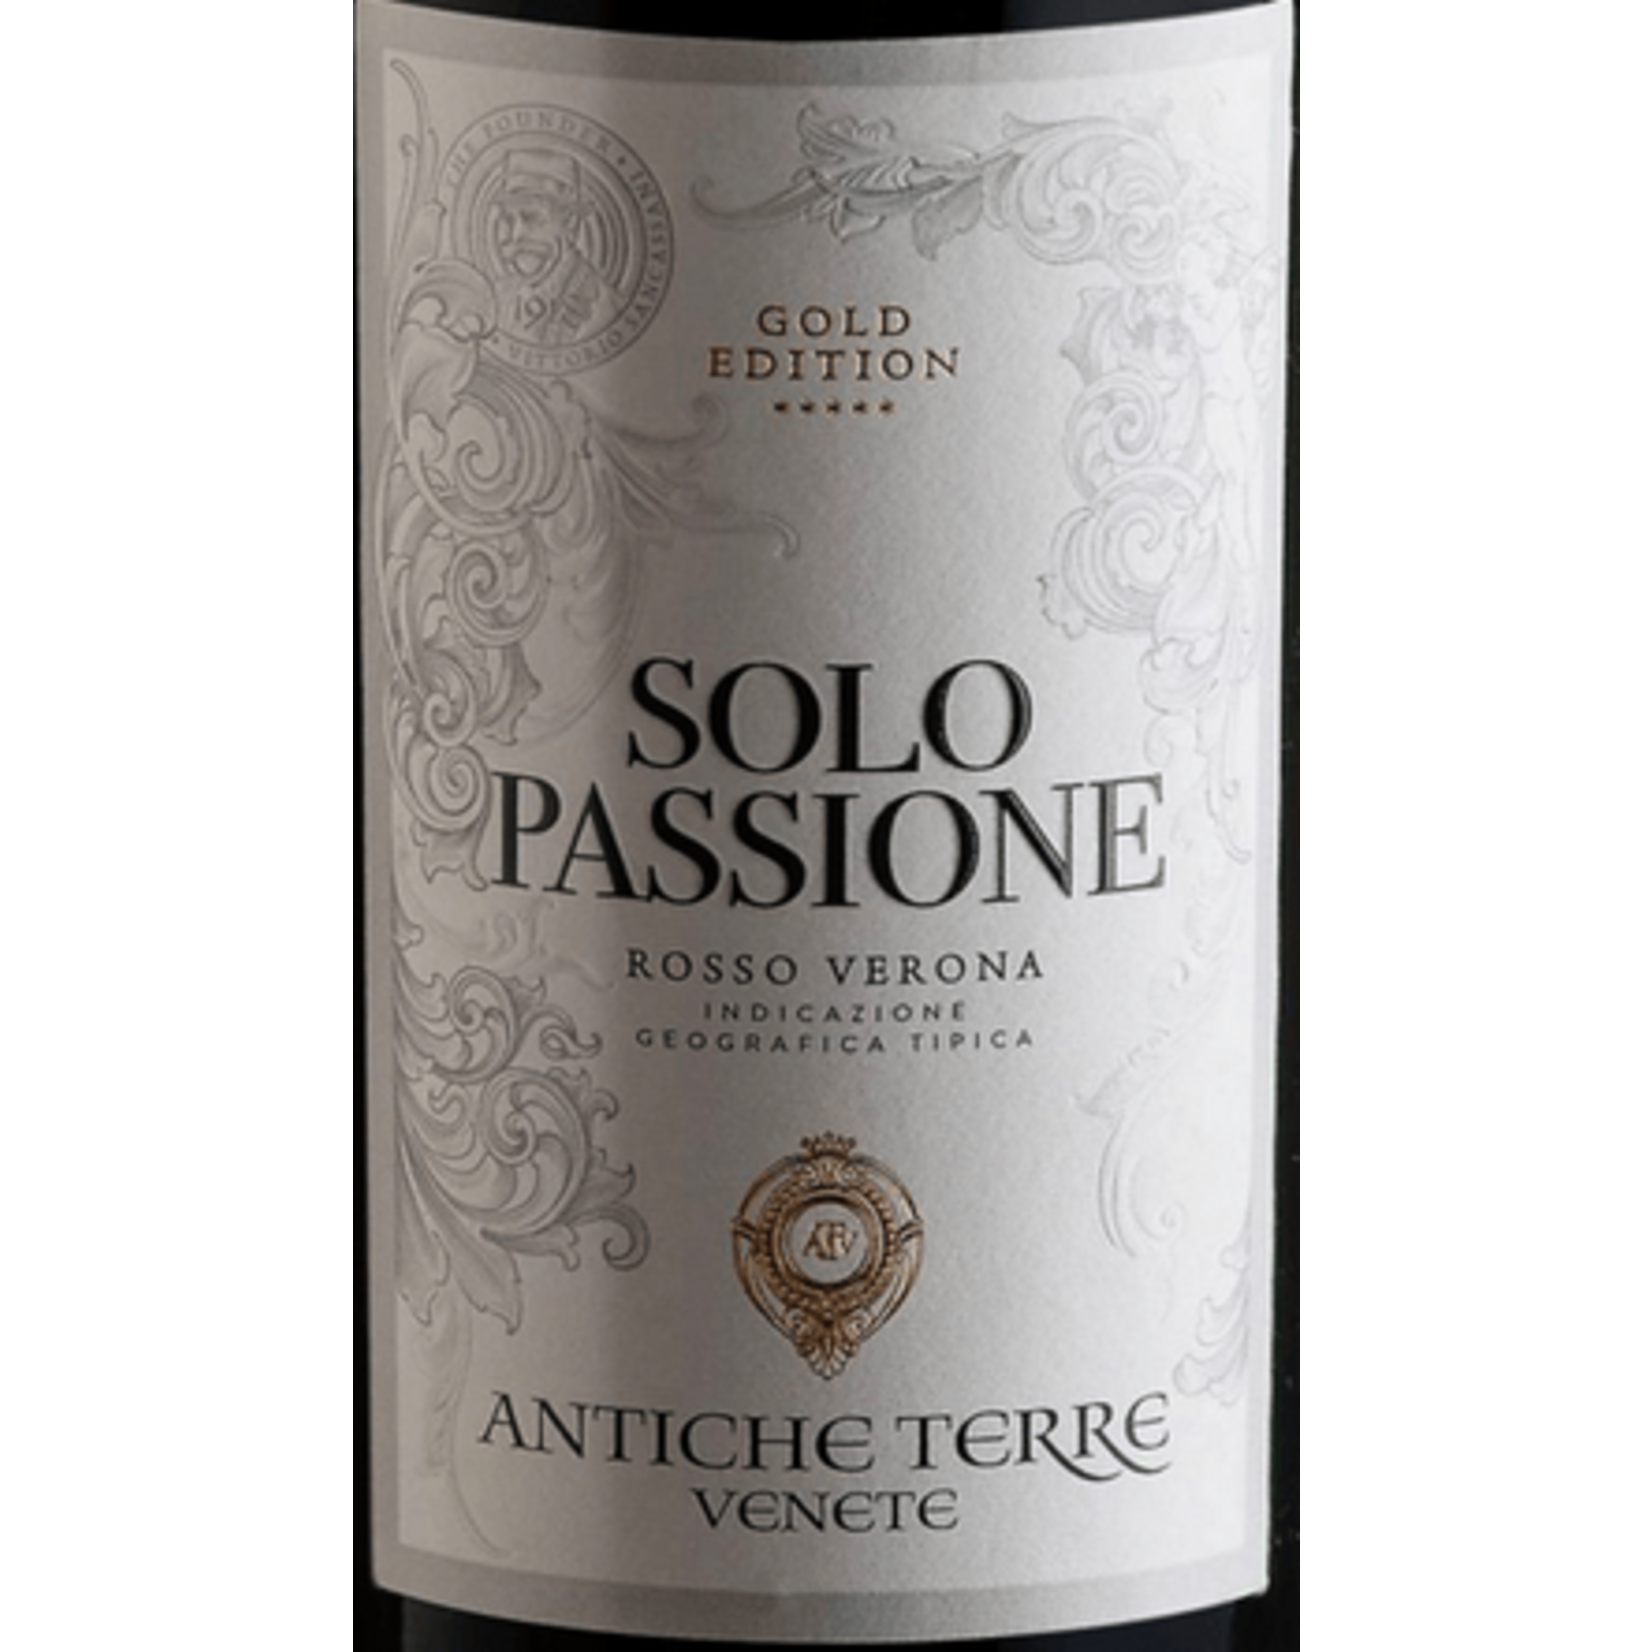 Antiche Terre Venete Antiche Terre Venete Solo Passione "Gold Edition" 2019  Italy